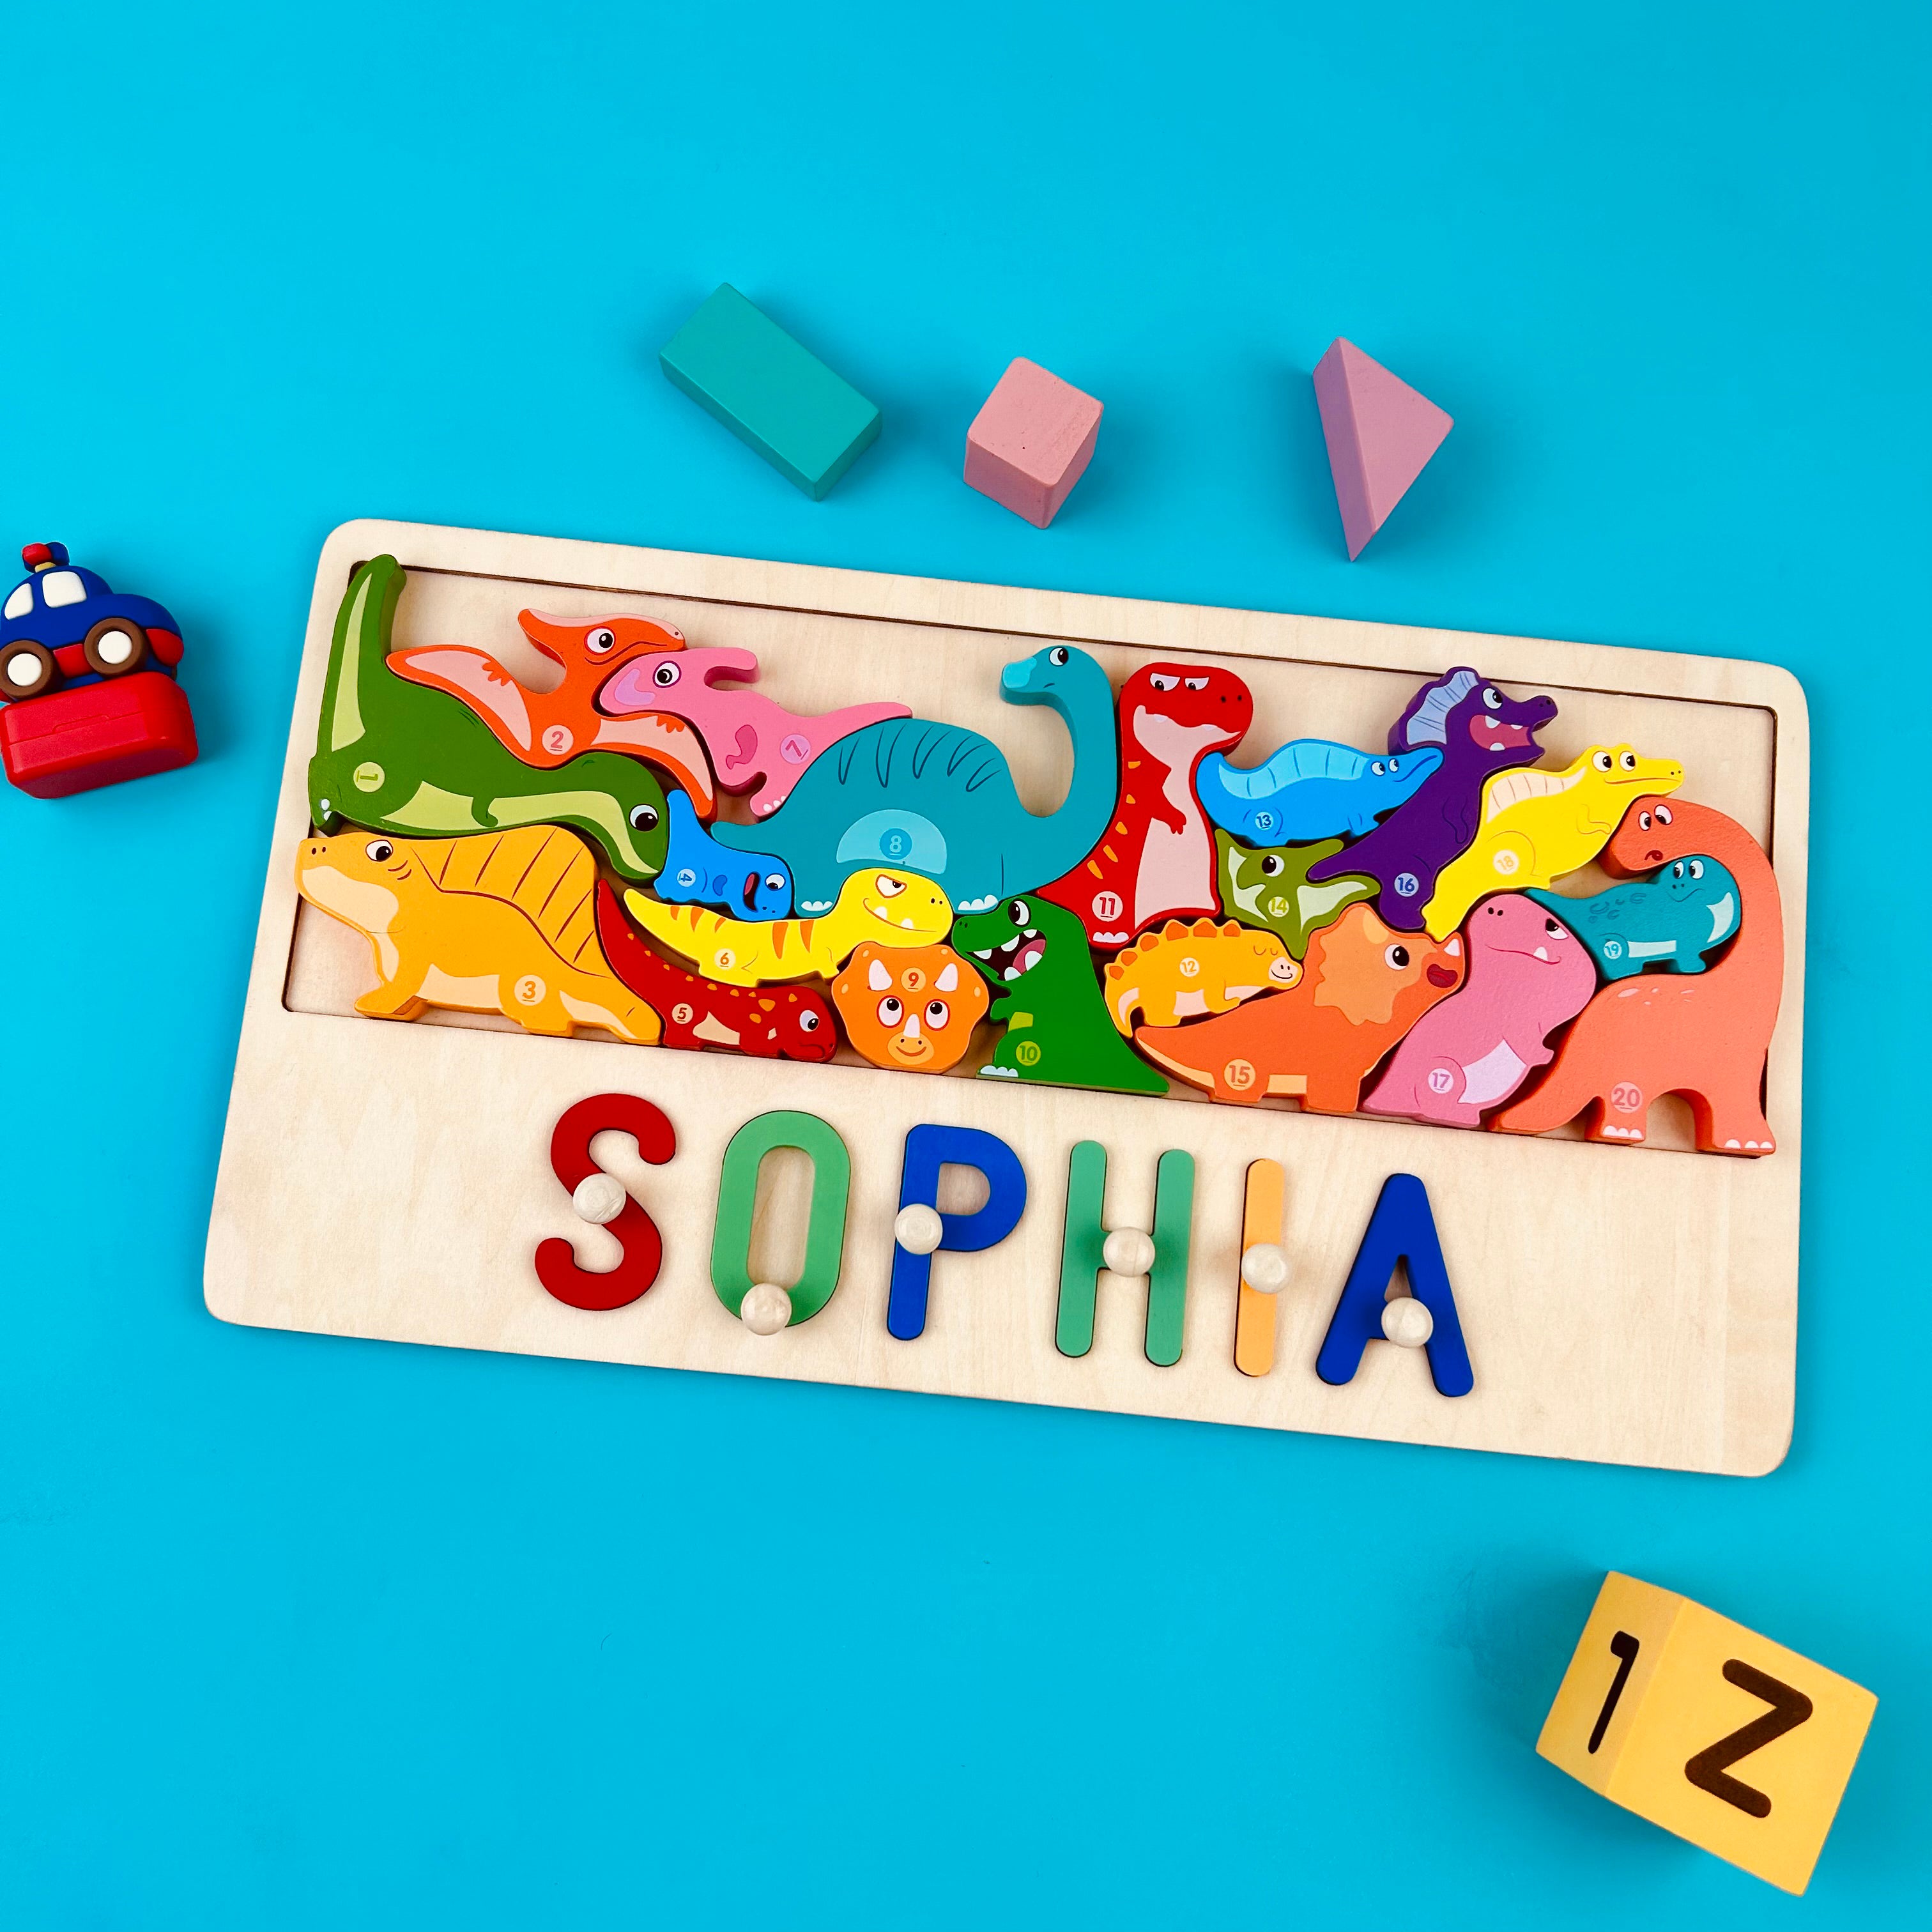 Personalized Wooden Animal Stacking Name Puzzle